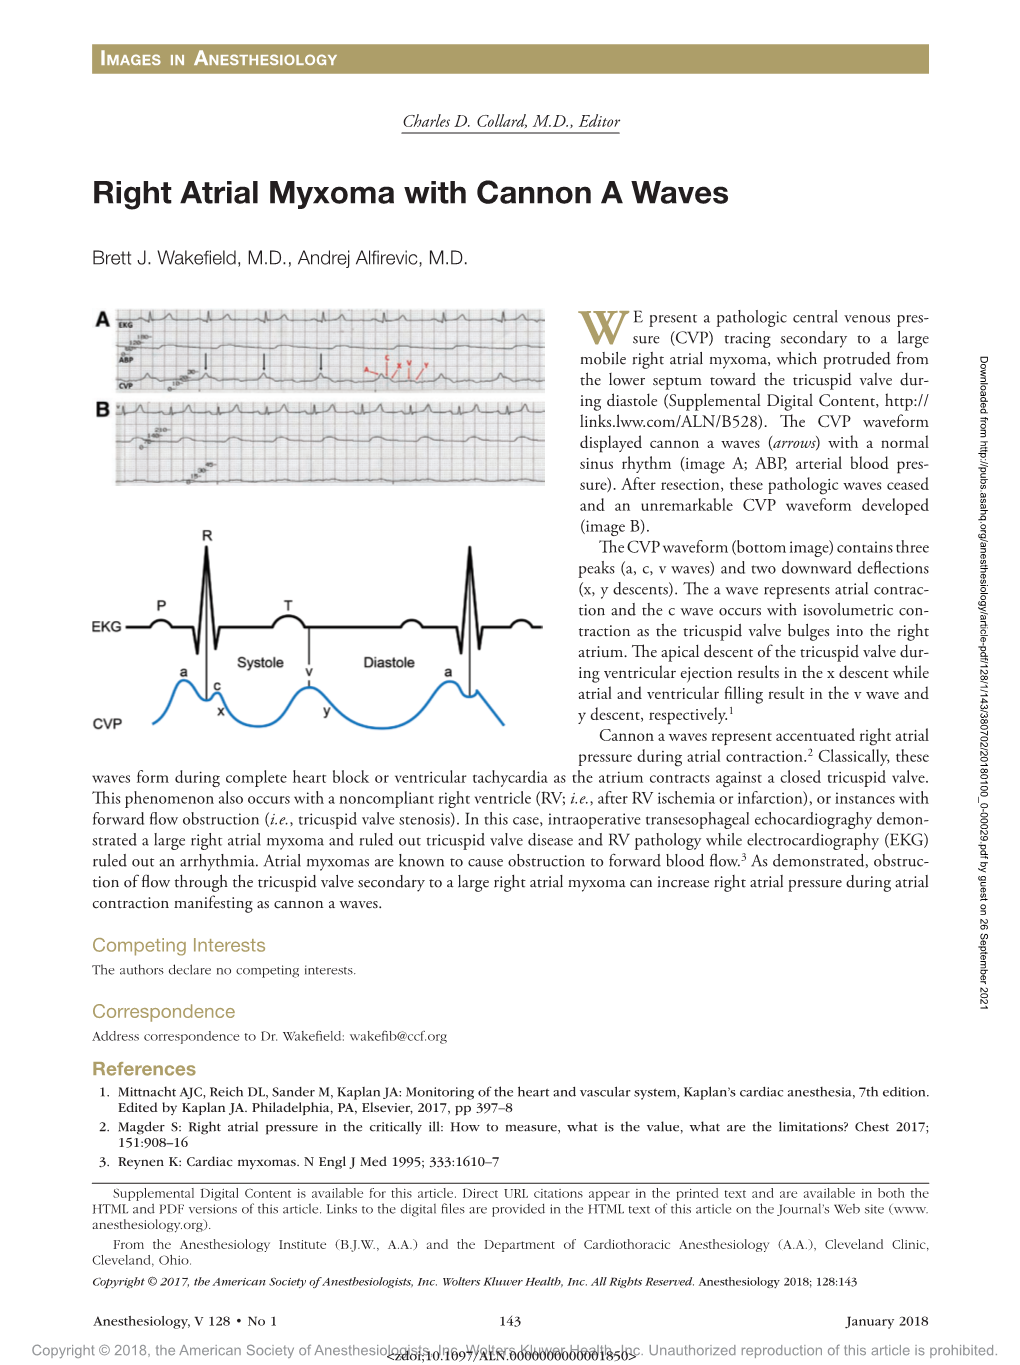 Right Atrial Myxoma with Cannon a Waves